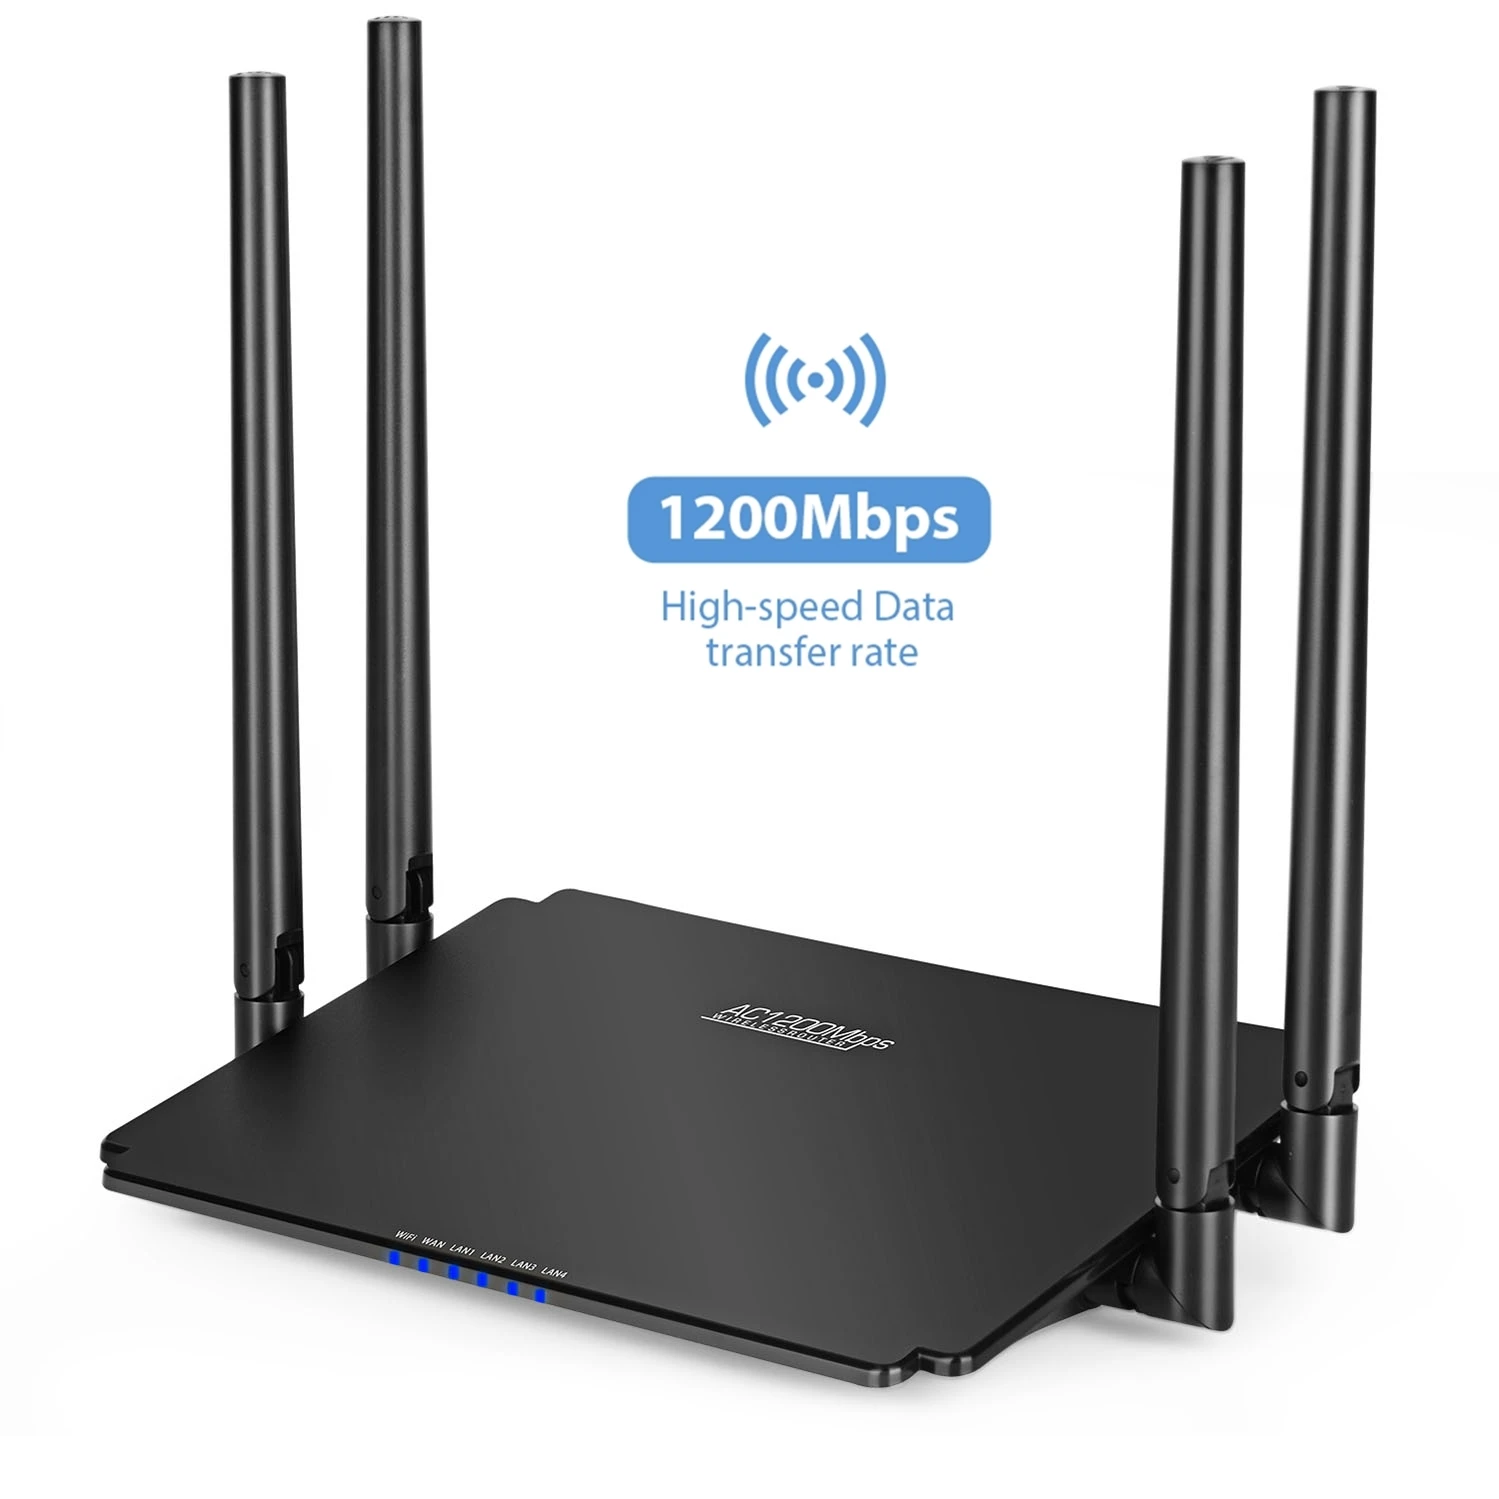 iMice Wifi Router 1200Mbps 5GHz Wireless Router High Speed Dual Band wi-fi Repeater Access Point Smart APP Control Wi Fi Router